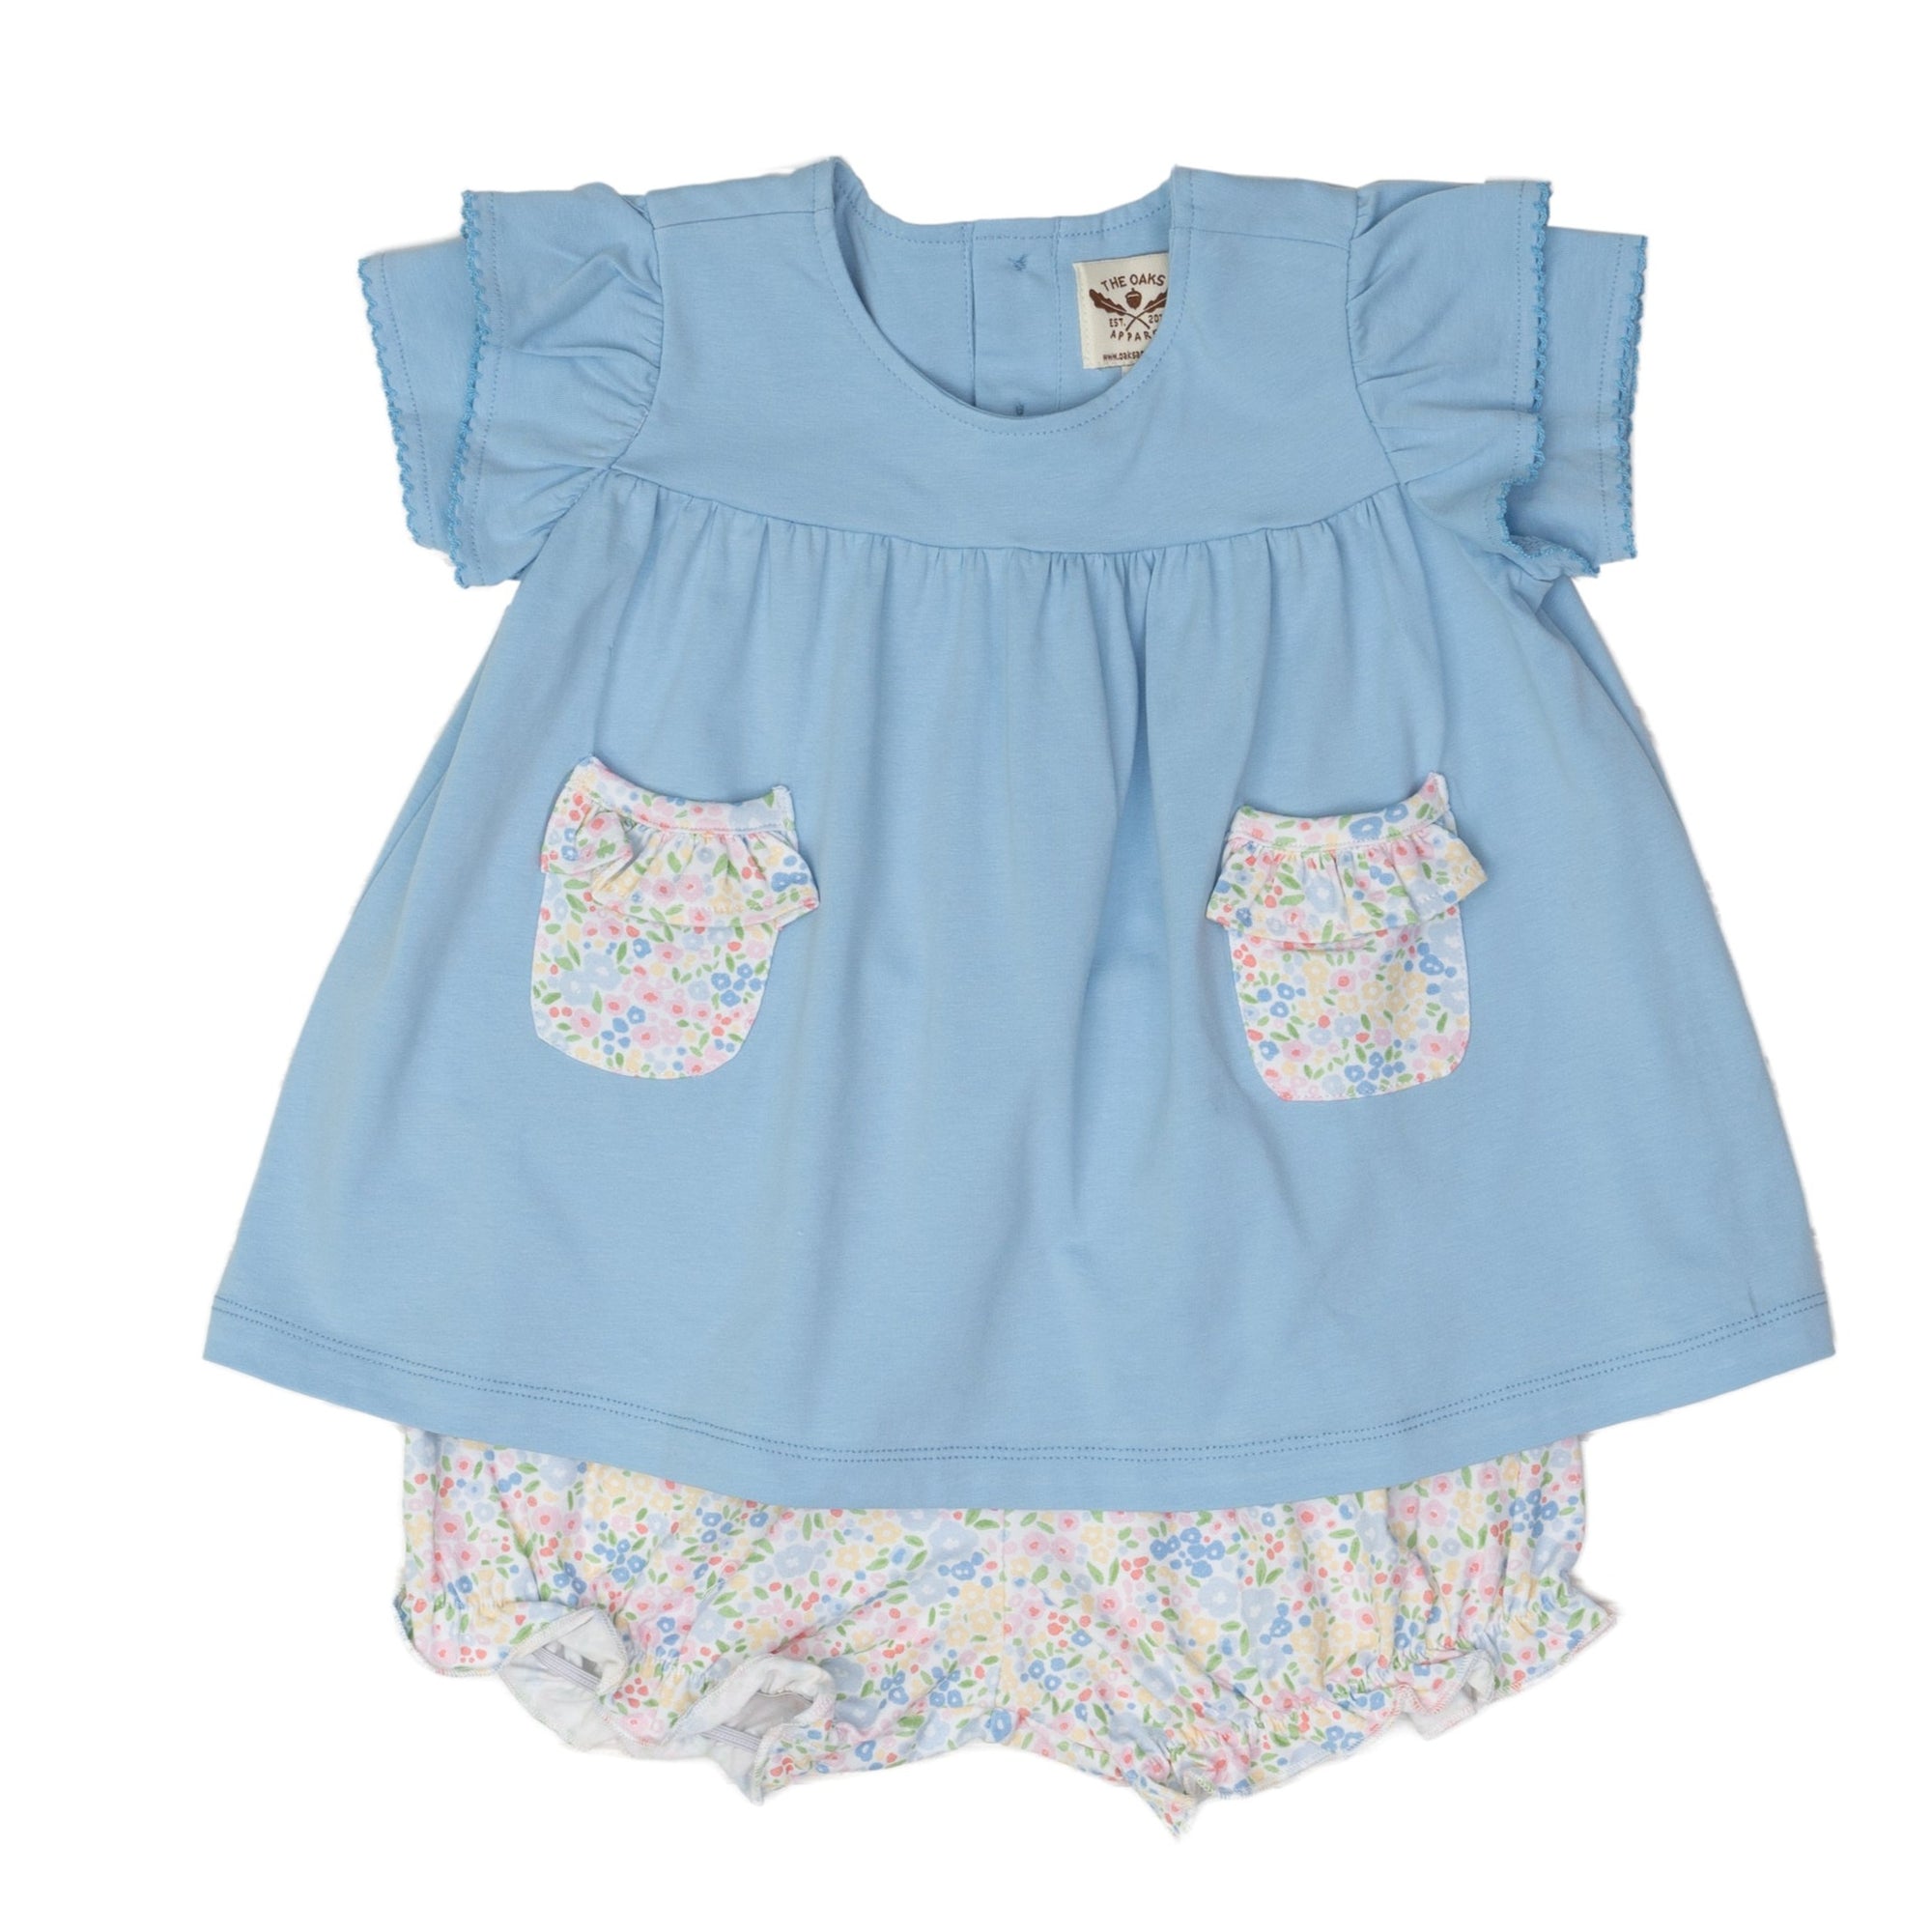 Spring Floral Baby Girl's Knit Bloomer Set by The Oaks